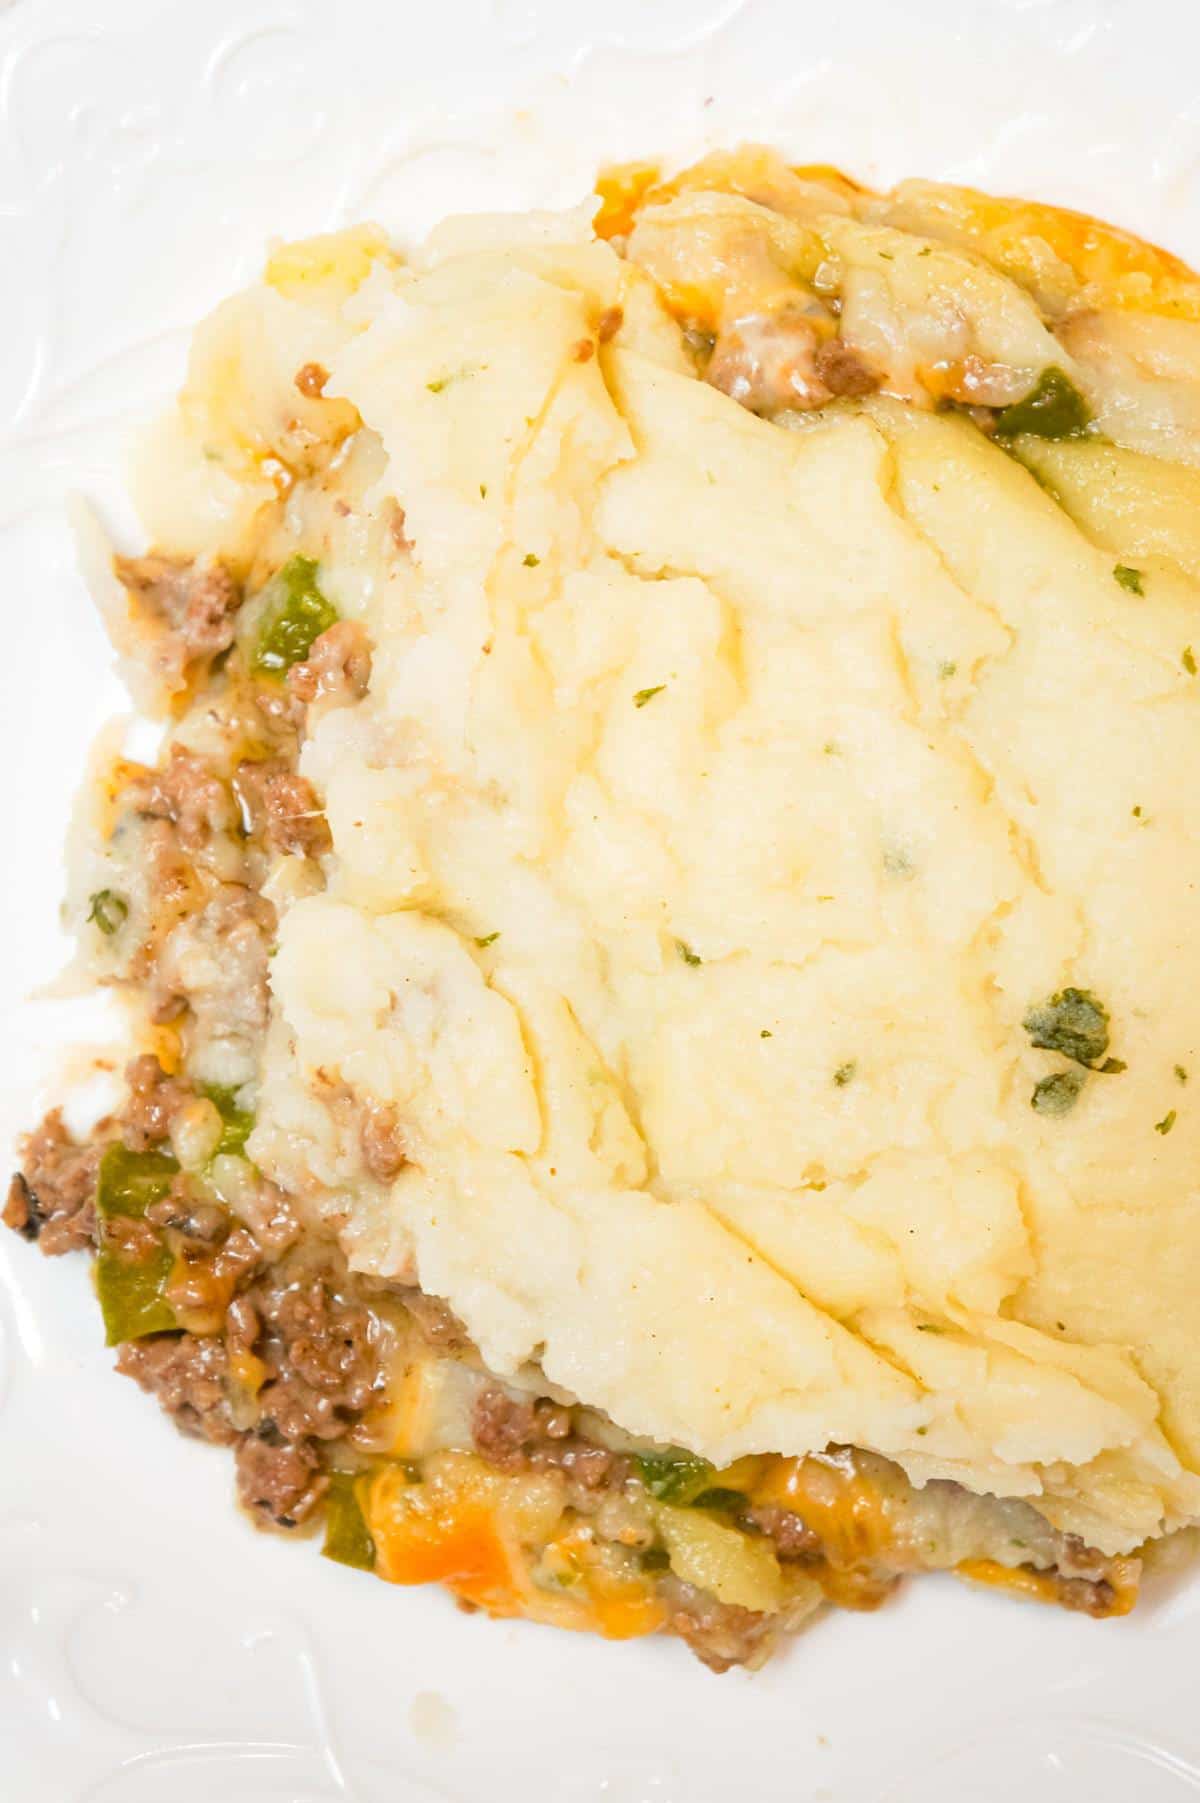 Philly Cheese Steak Shepherd's Pie is an easy casserole recipe loaded with ground beef, onions, green peppers, cheese and mashed potatoes.